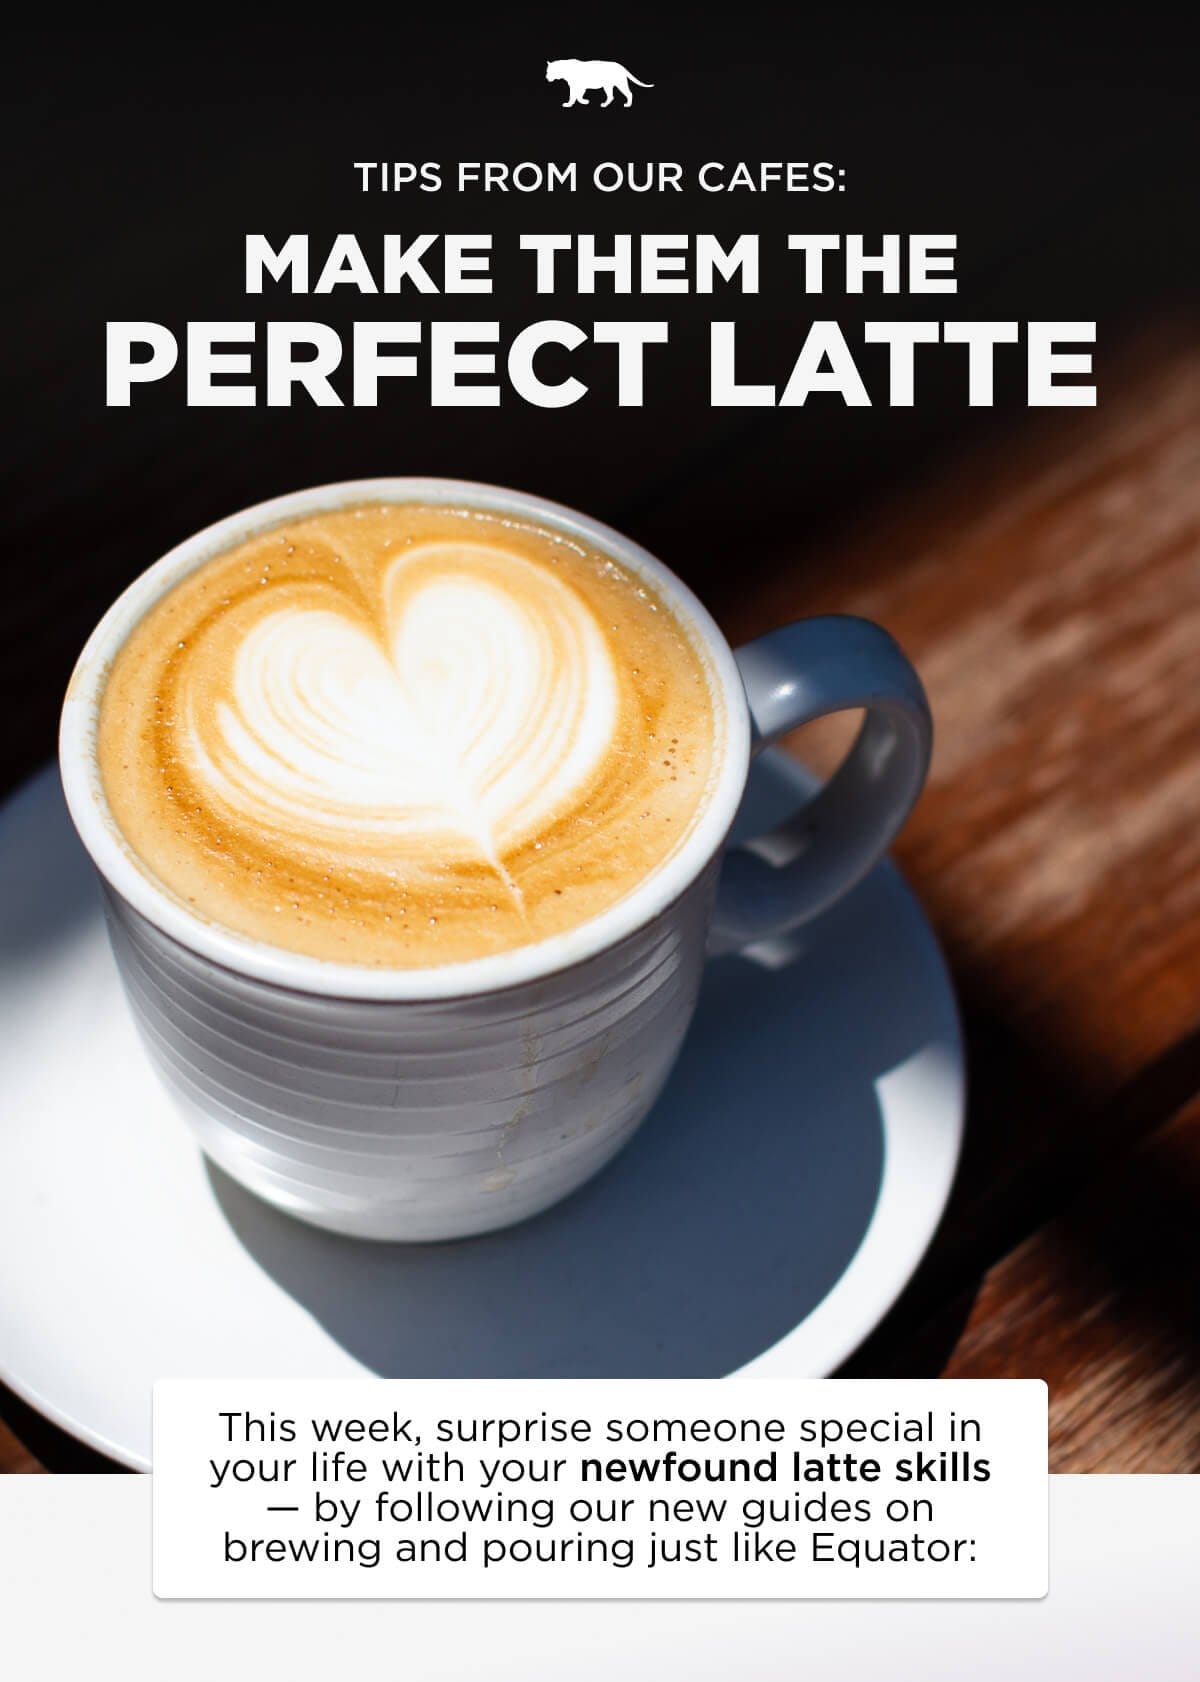 Tips from the roatsery: making them the perfect latte